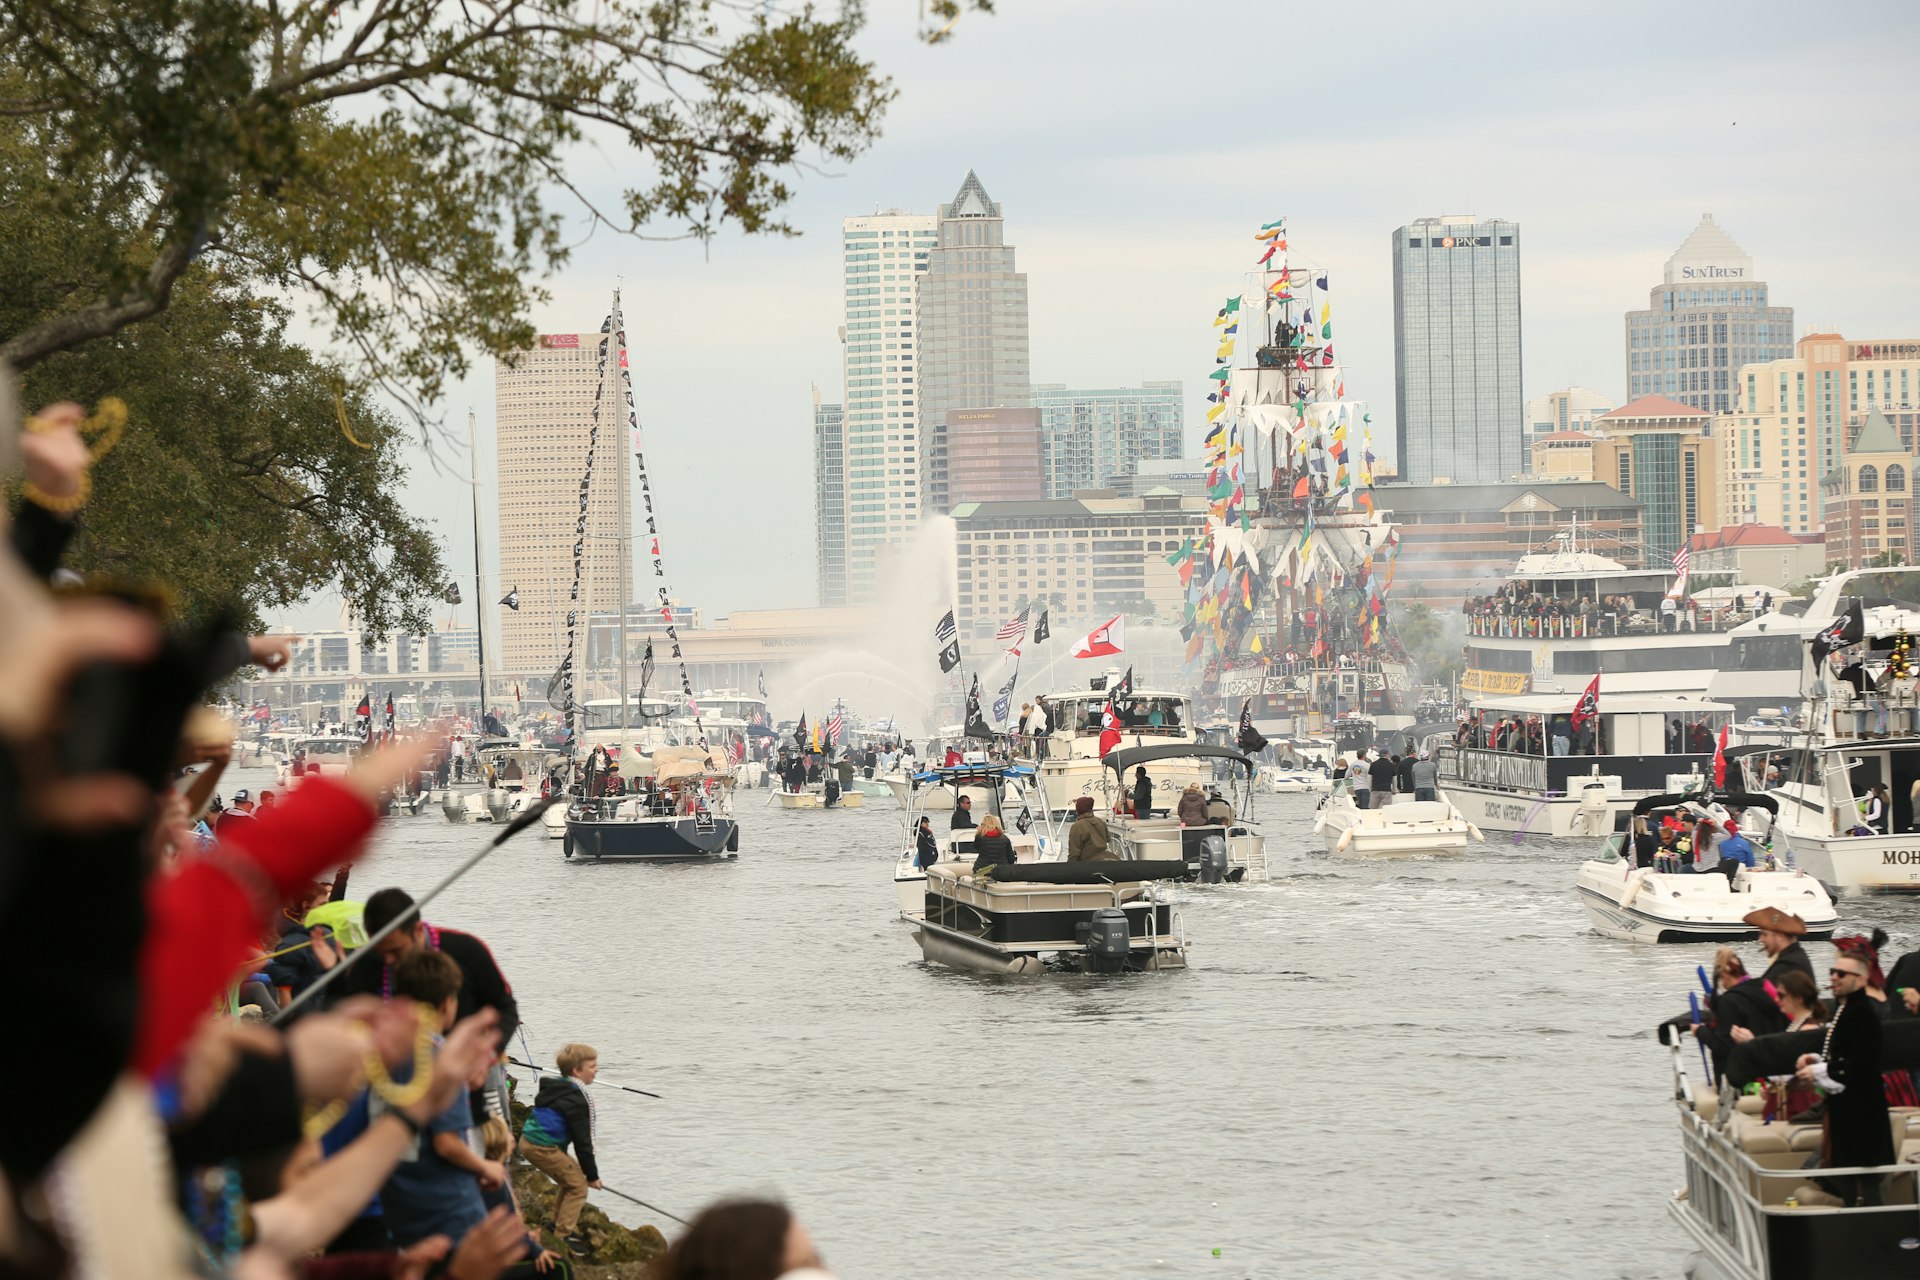 People watch from shore as boats sail into Tampa Bay as part of the pirate-themed festival Gasparilla